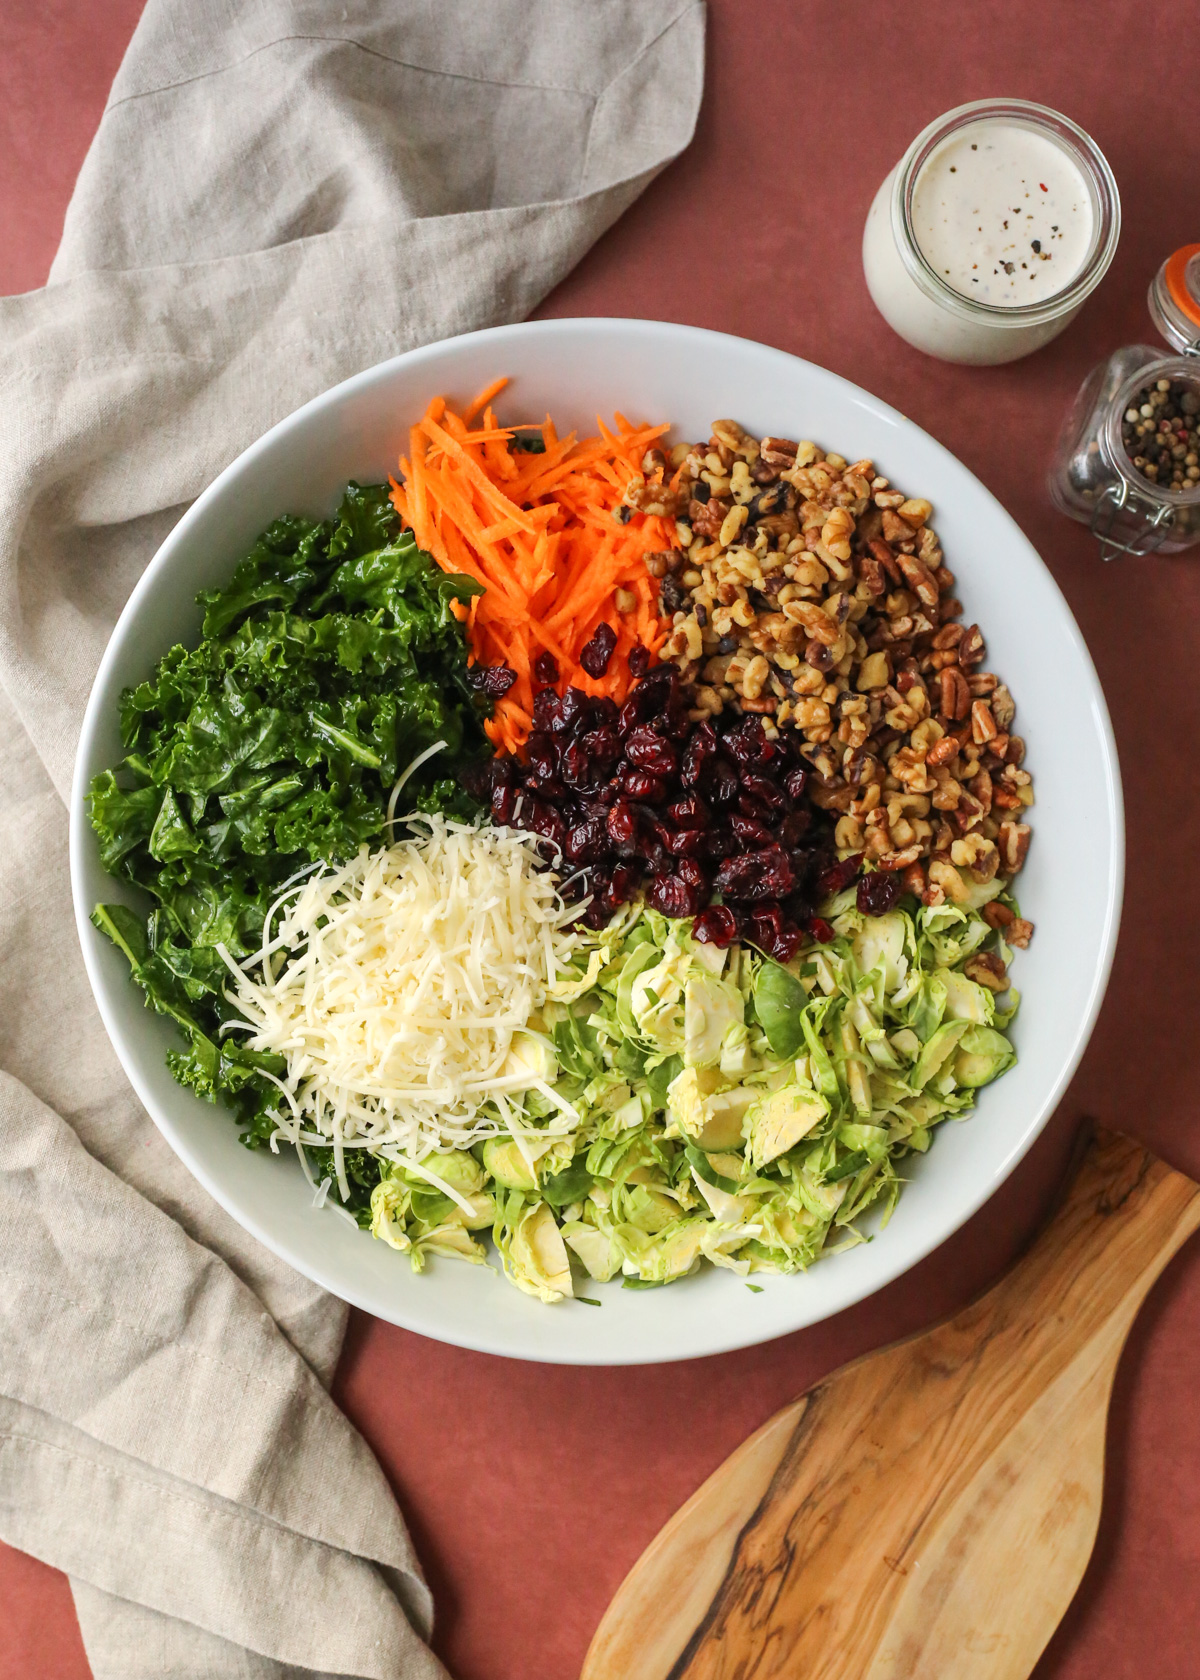 Overhead view into a large white mixing bowl on a kitchen countertop, filled with the unmixed ingredients for a kale and brussels sprout salad recipe, including massaged kale, shredded parmesan cheese, thinly sliced brussels sprouts, dried cranberries, chopped nuts, and shredded carrot, with a jar of creamy peppercorn dressing placed nearby